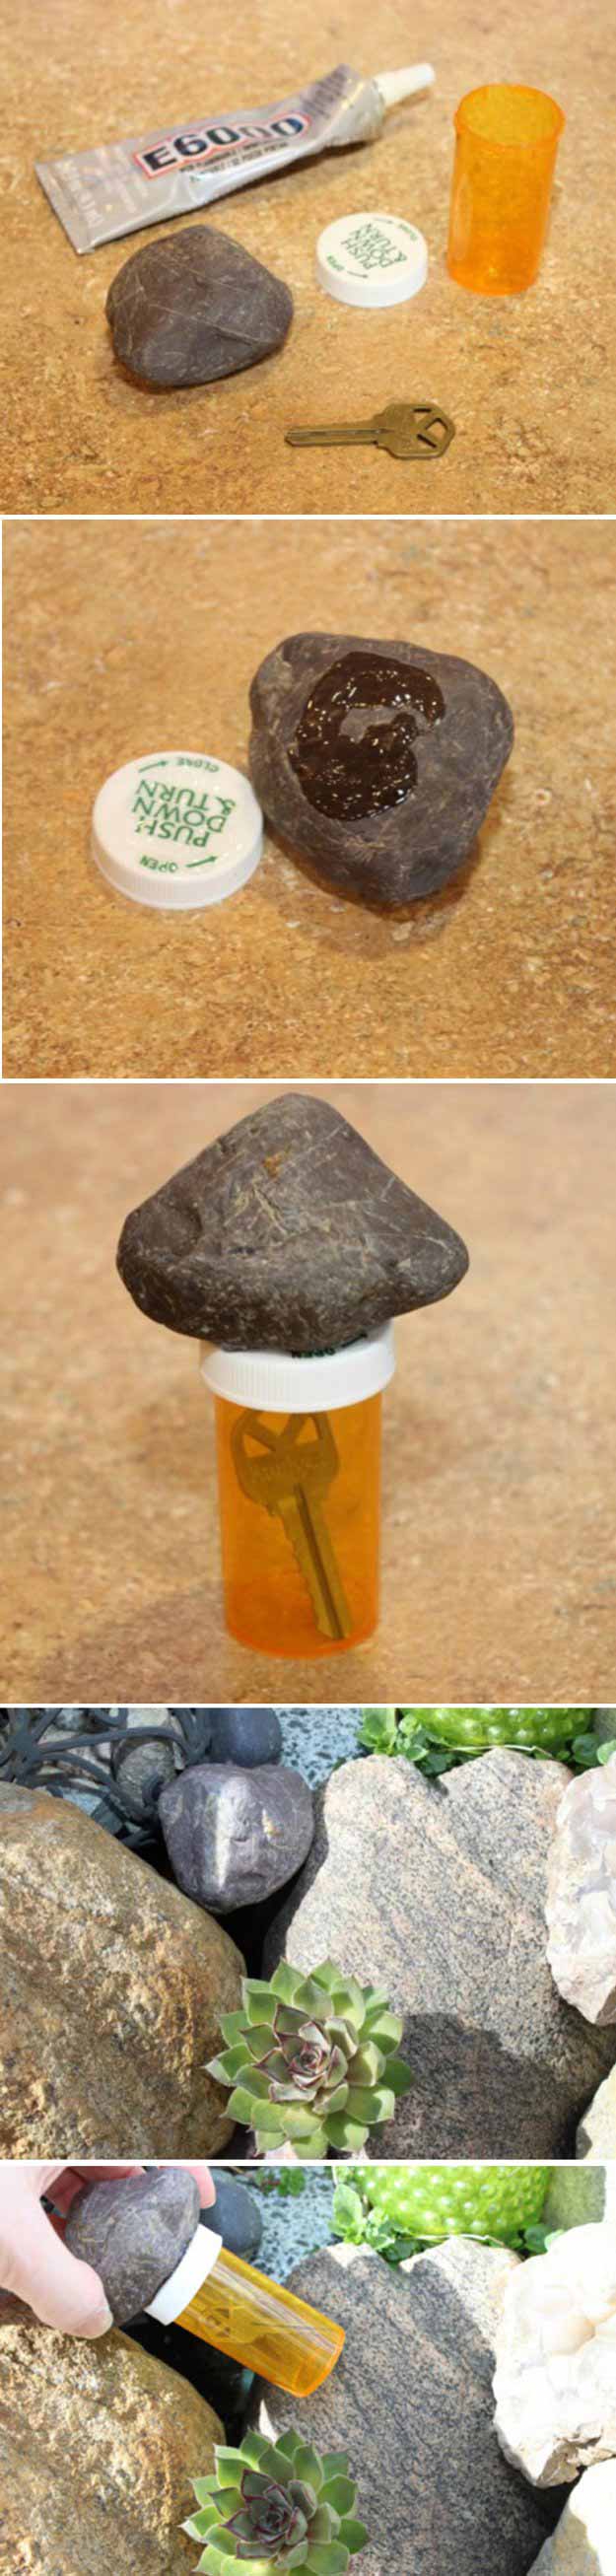 Concealed Key storage DIY Pill Bottle Projects | 15 Awesome DIY Uses for empty Pill Bottles